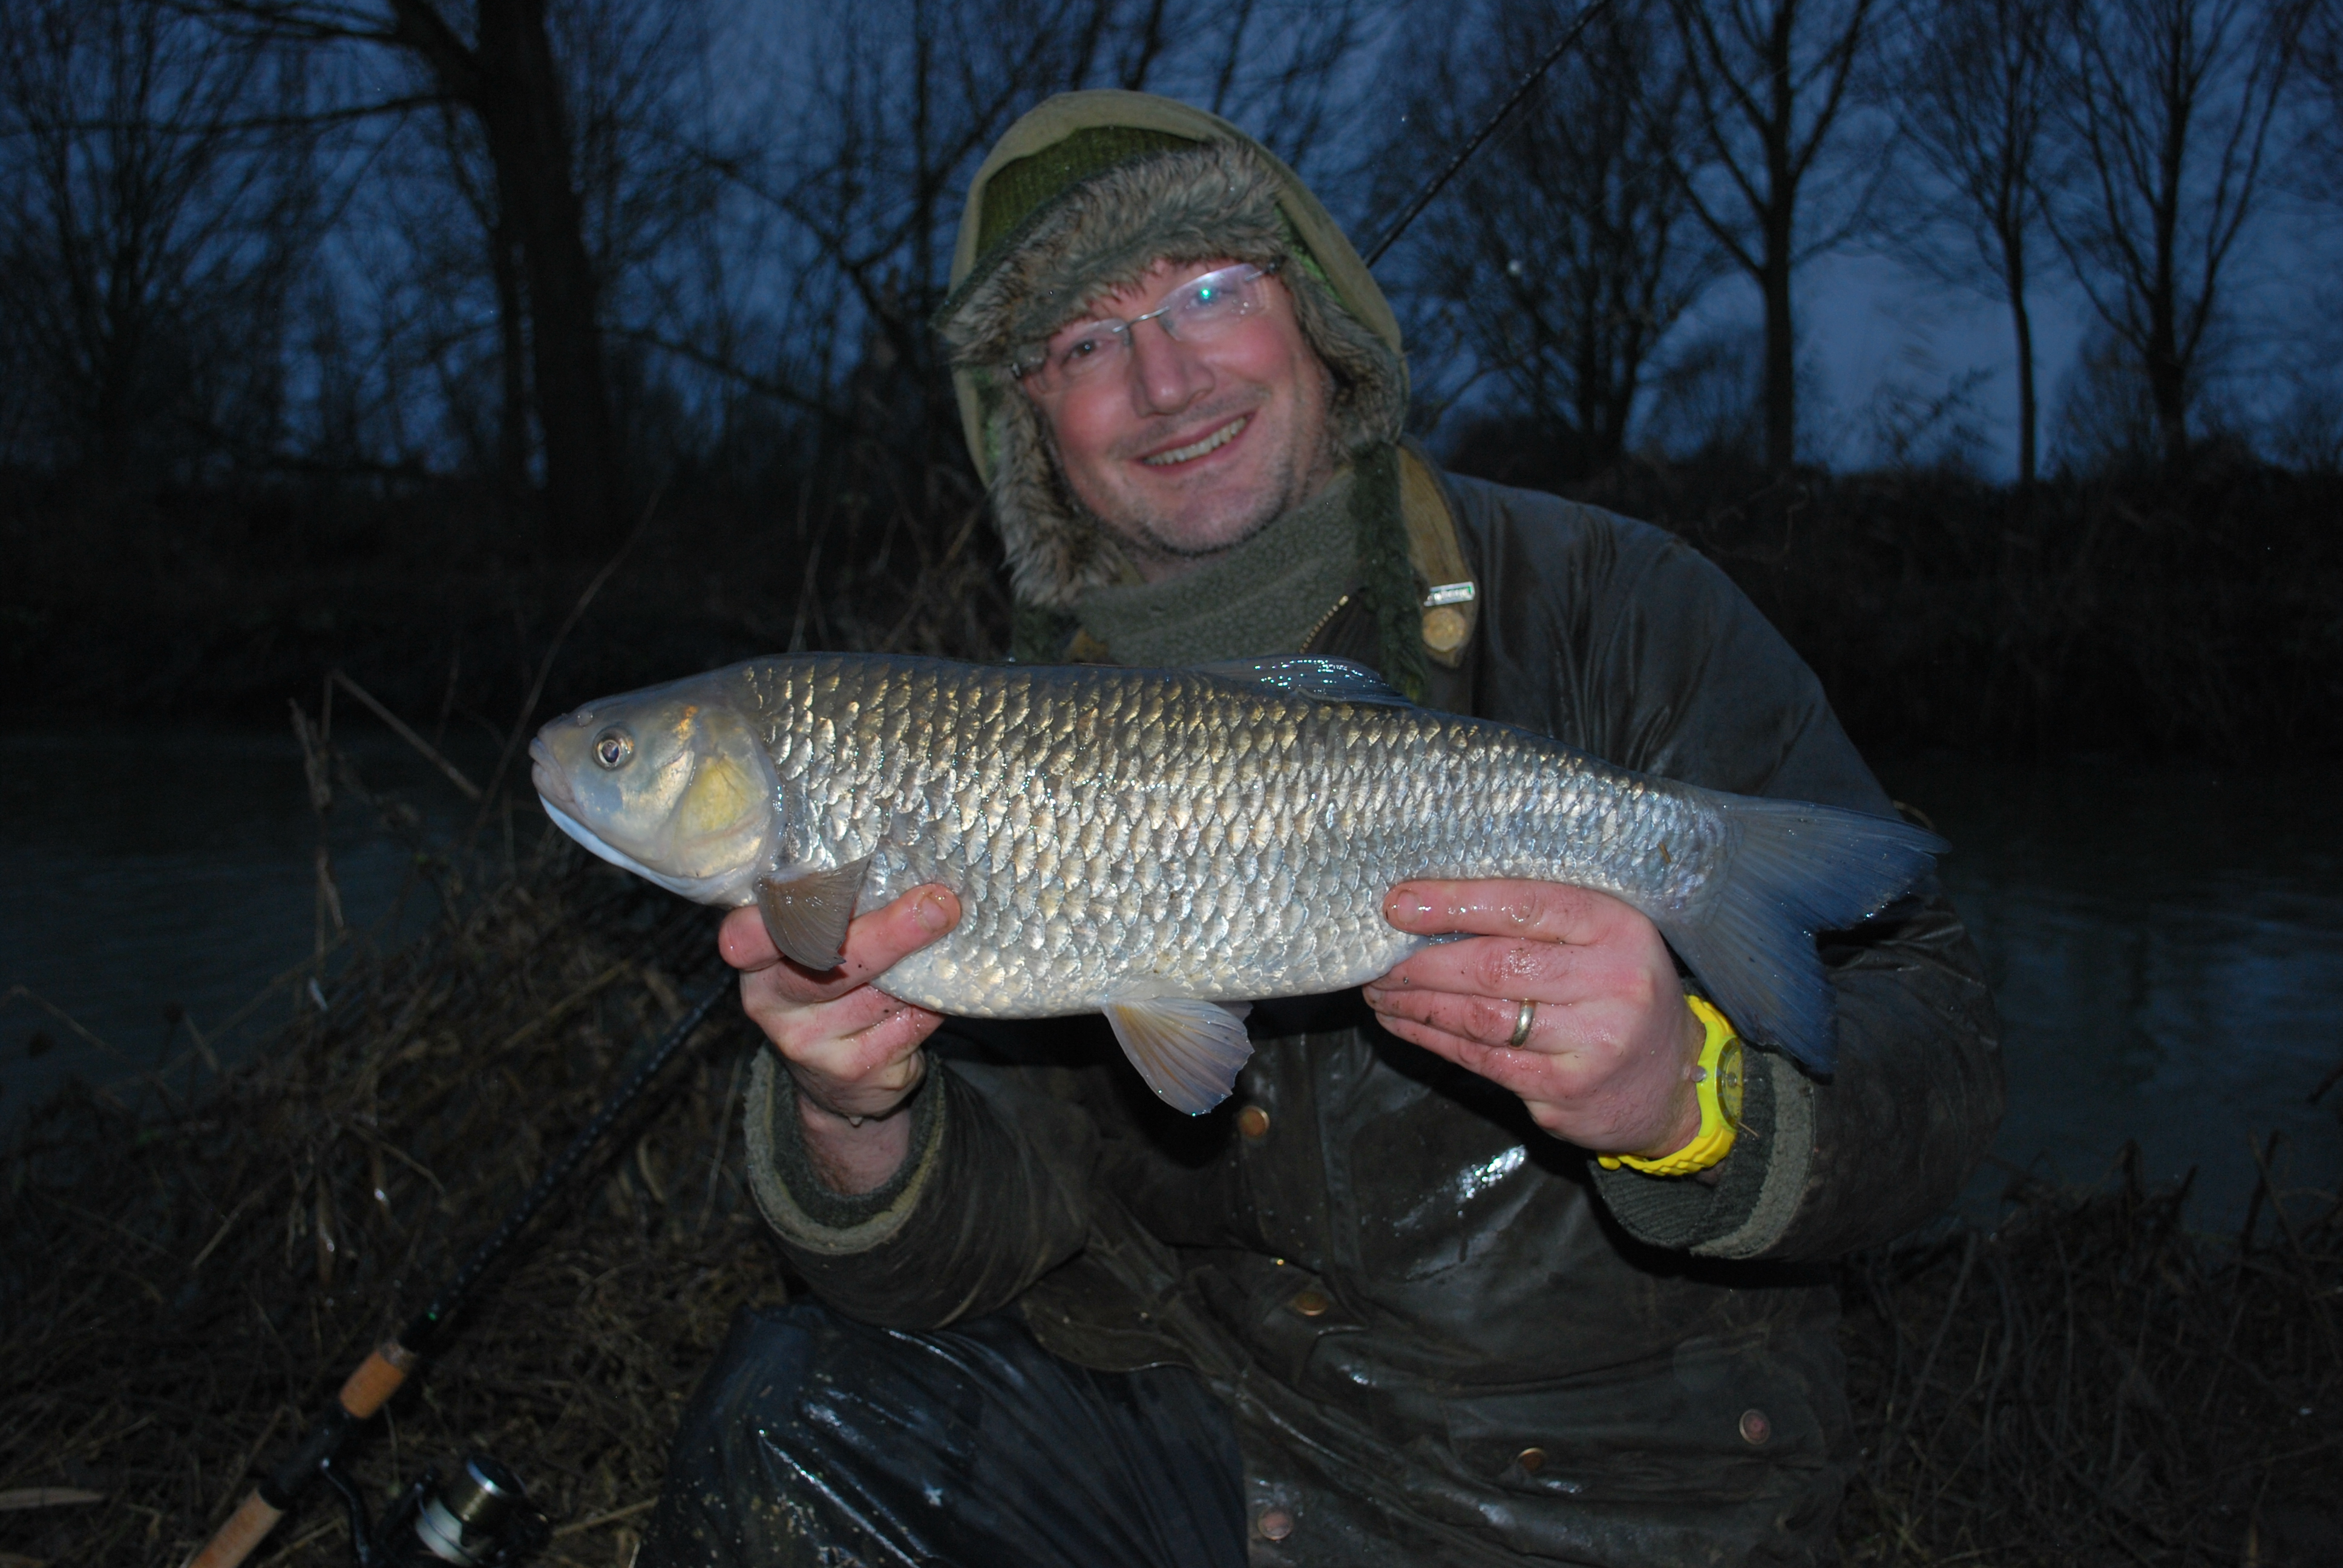 Winter Chub fishing – some thoughts on bite indication. - Lee